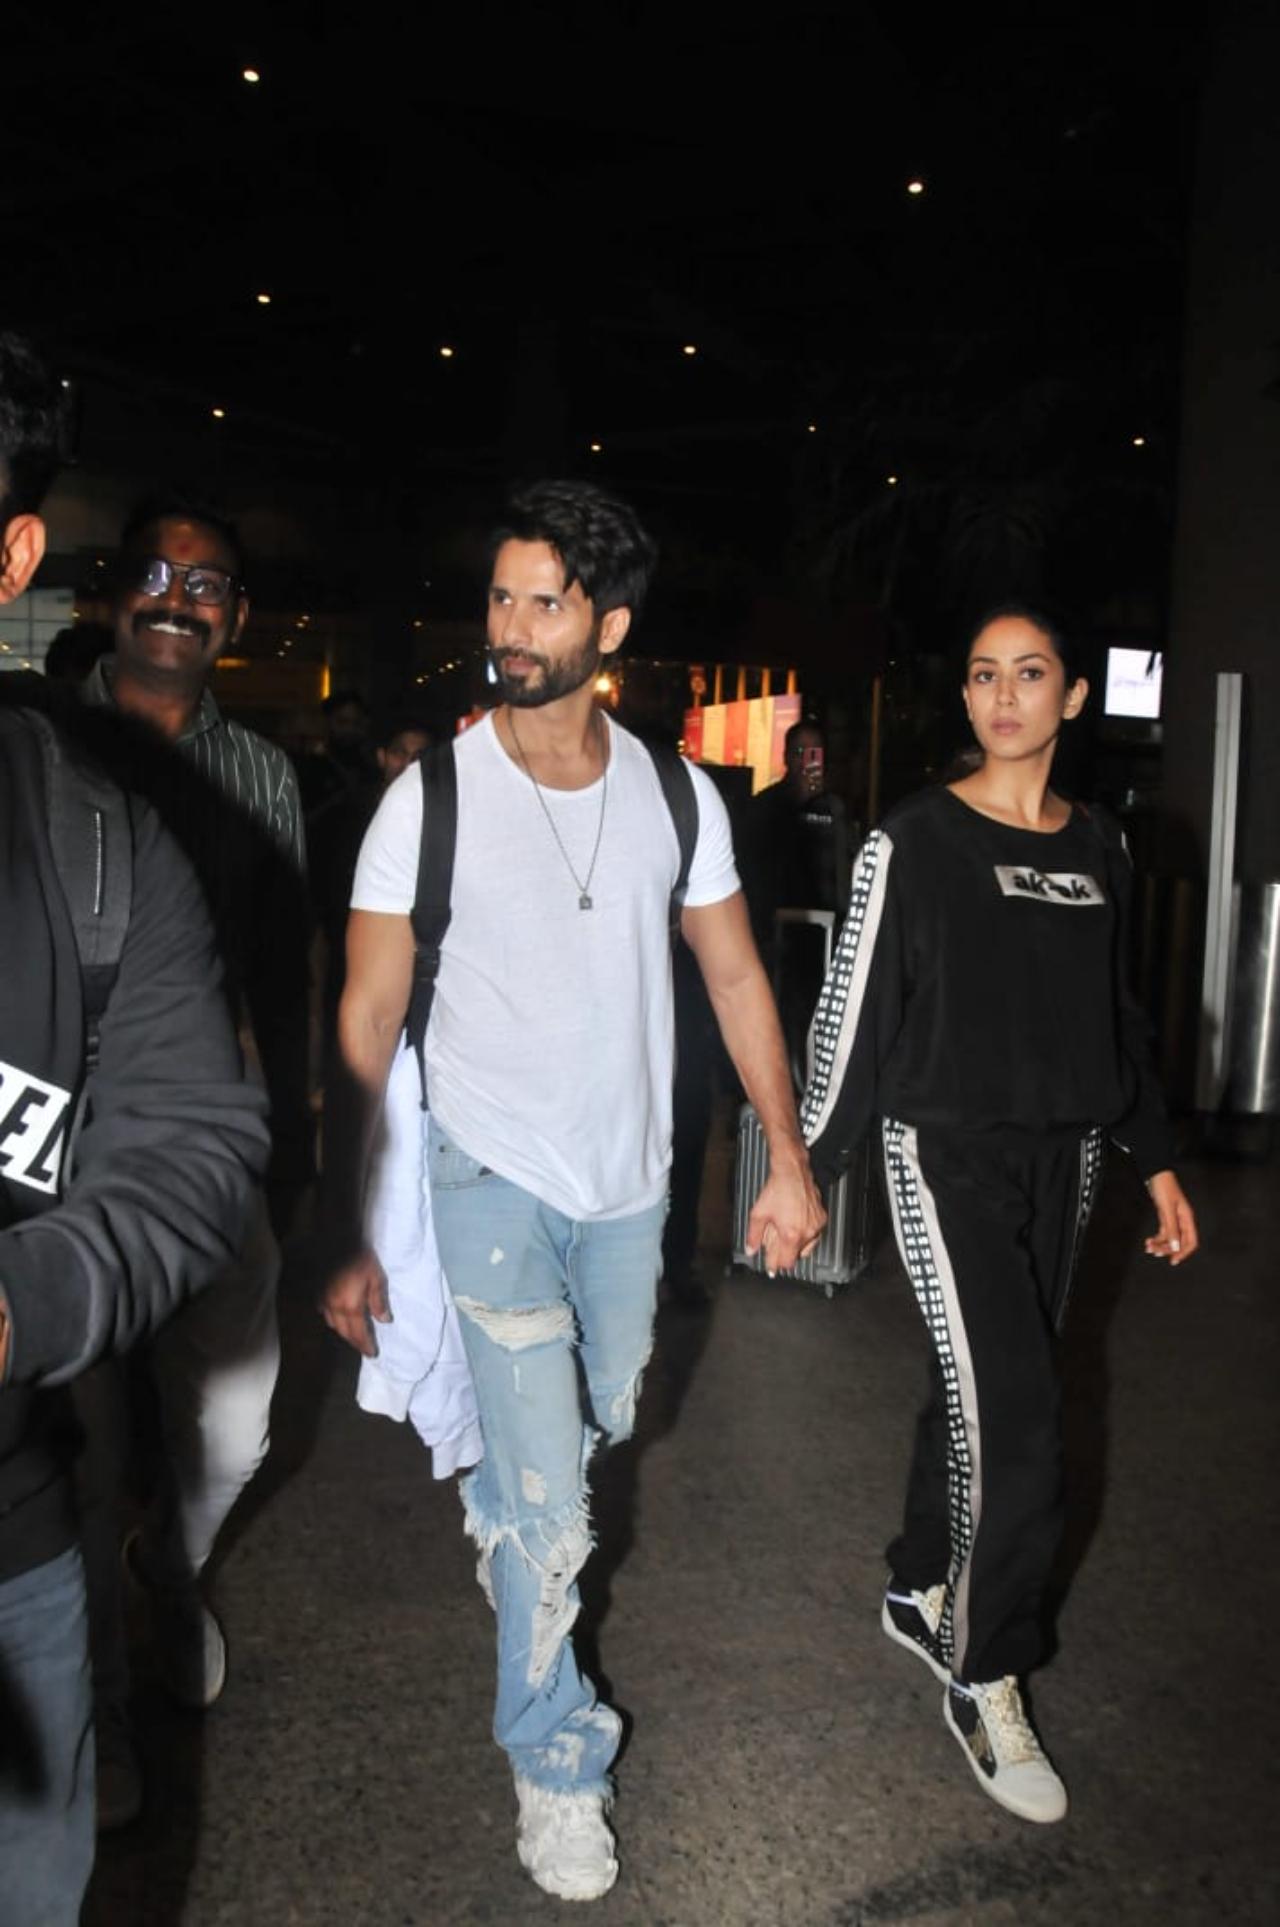 On Tuesday night, hours after the varmala ceremony, Shahid and Mira were snapped at Mumbai airport as they arrived from Jaisalmer. The couple opted for a casual look for their flight back home. Mira was seen with some classy make-up on her face